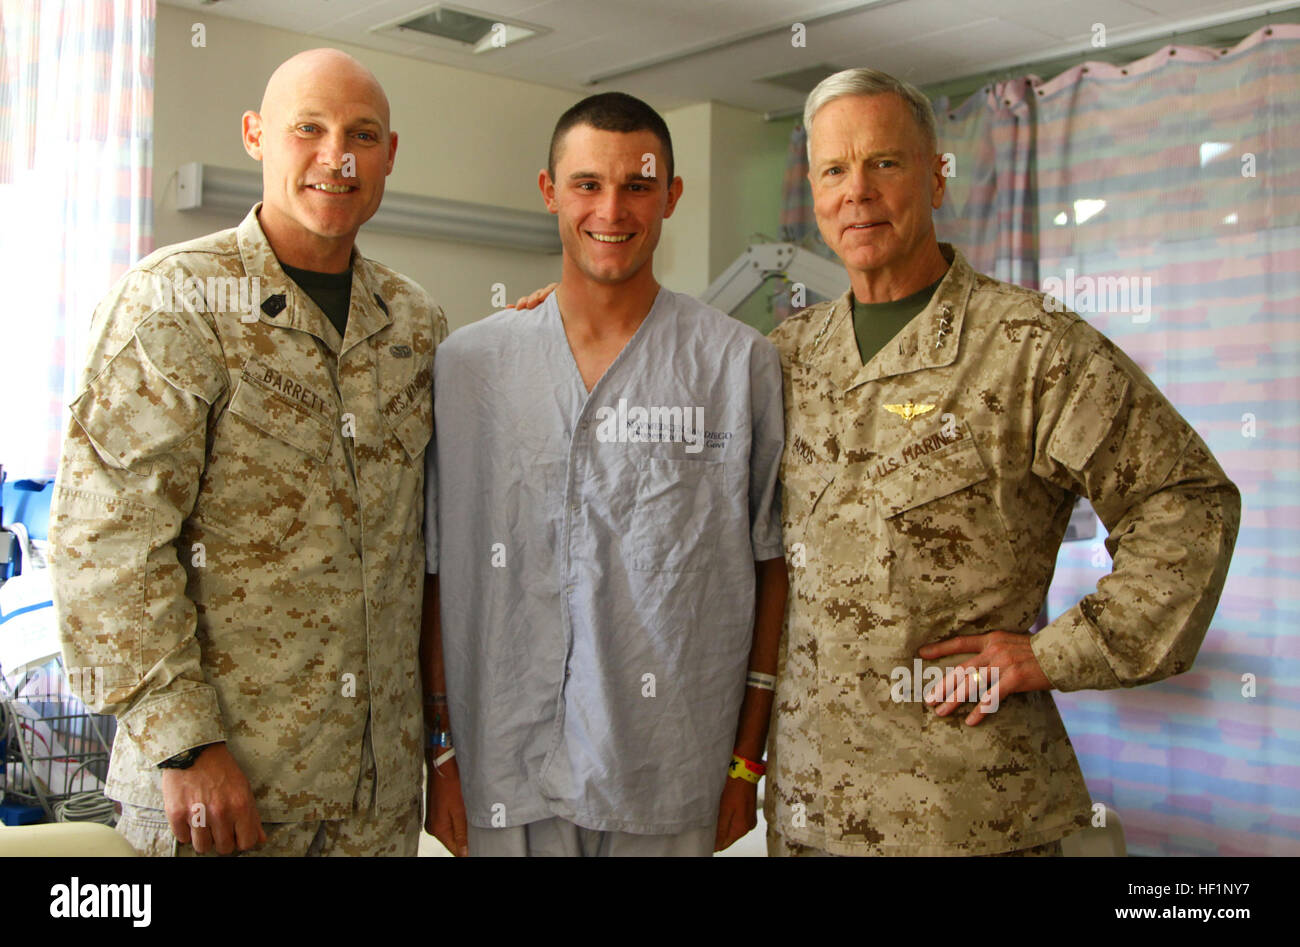 The 35th commandant of the Marine Corps, General James F. Amos, the 17th sergeant major of the Marine Corps, Sgt. Maj. Micheal P. Barrett and Mrs. Bonnie Amos, visit wounded warriors and patients at Balboa Hospital, Naval Medical Center San Diego, Calif., Oct. 19, 2013. (U.S. Marine Corps photo by Sgt. Keonaona C. Paulo, 3rd MAW Combat Camera/Released) CMC visits Wounded Warriors at Balboa Hospital 131019-M-EF955-071 Stock Photo